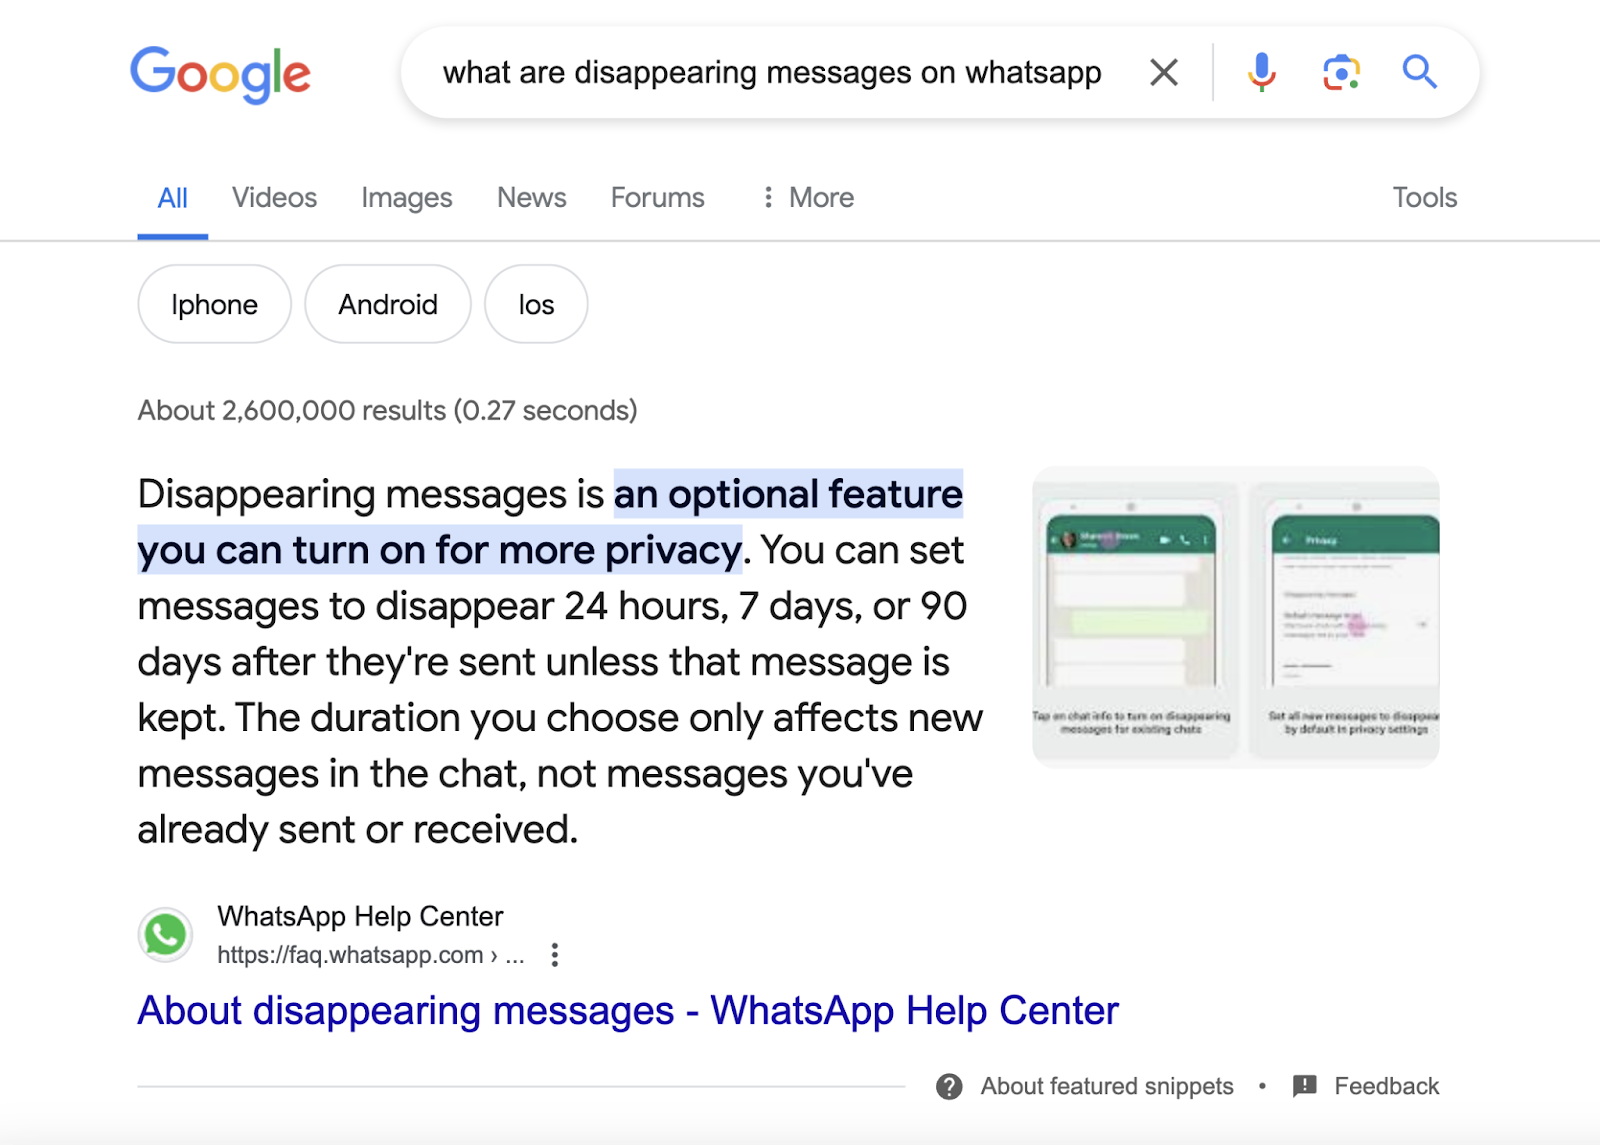 google search for "what are disappearing messages on whatsapp" shows featured snippet for whatsapp help center